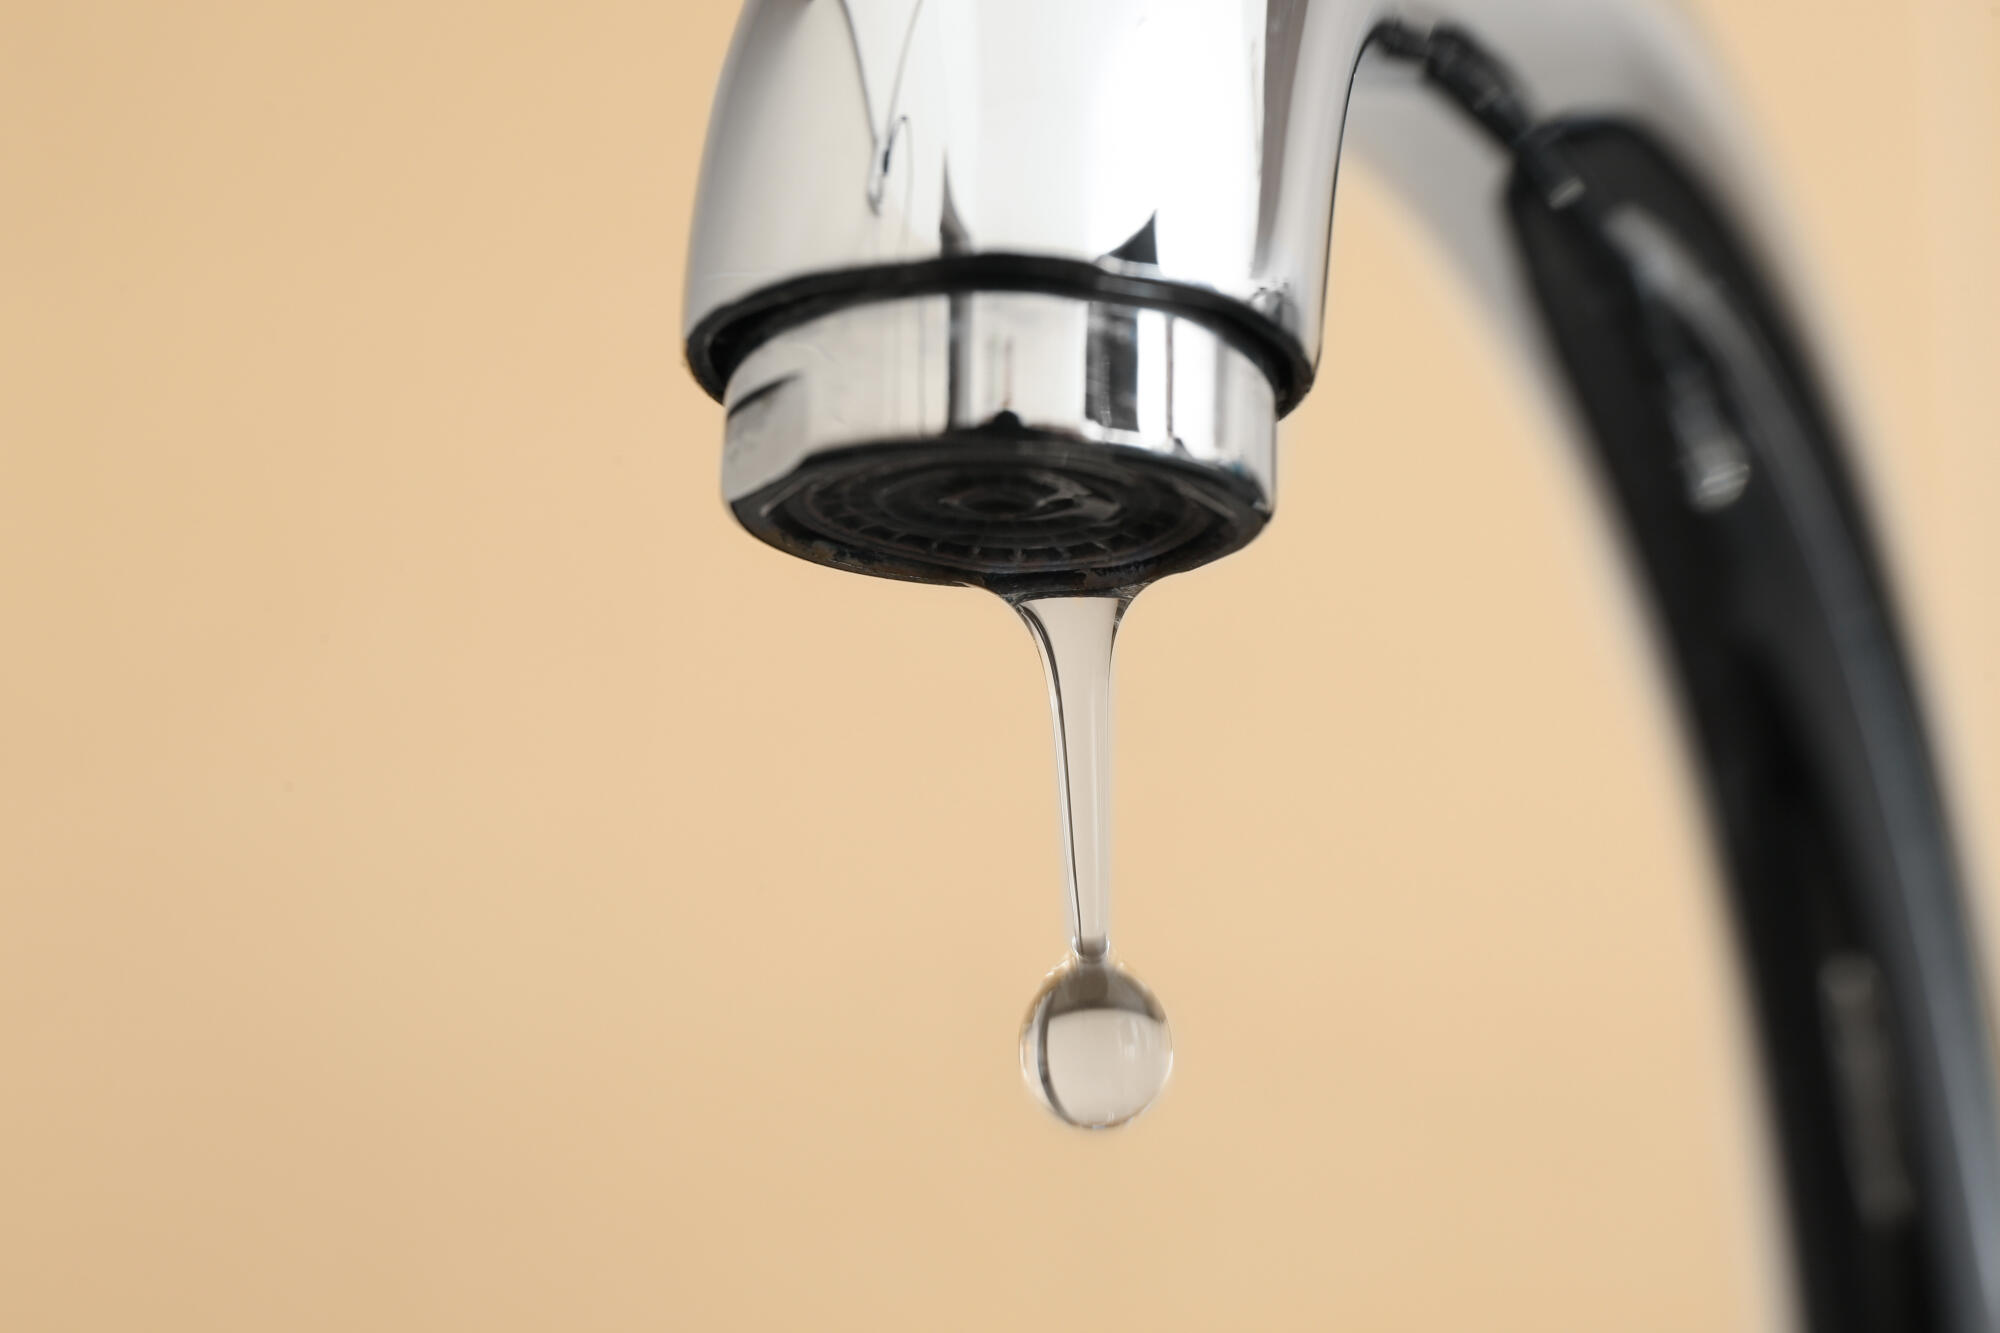 Why Is My Faucet Dripping? A Troubleshooting Guide for Stillwater, OK Homeowners